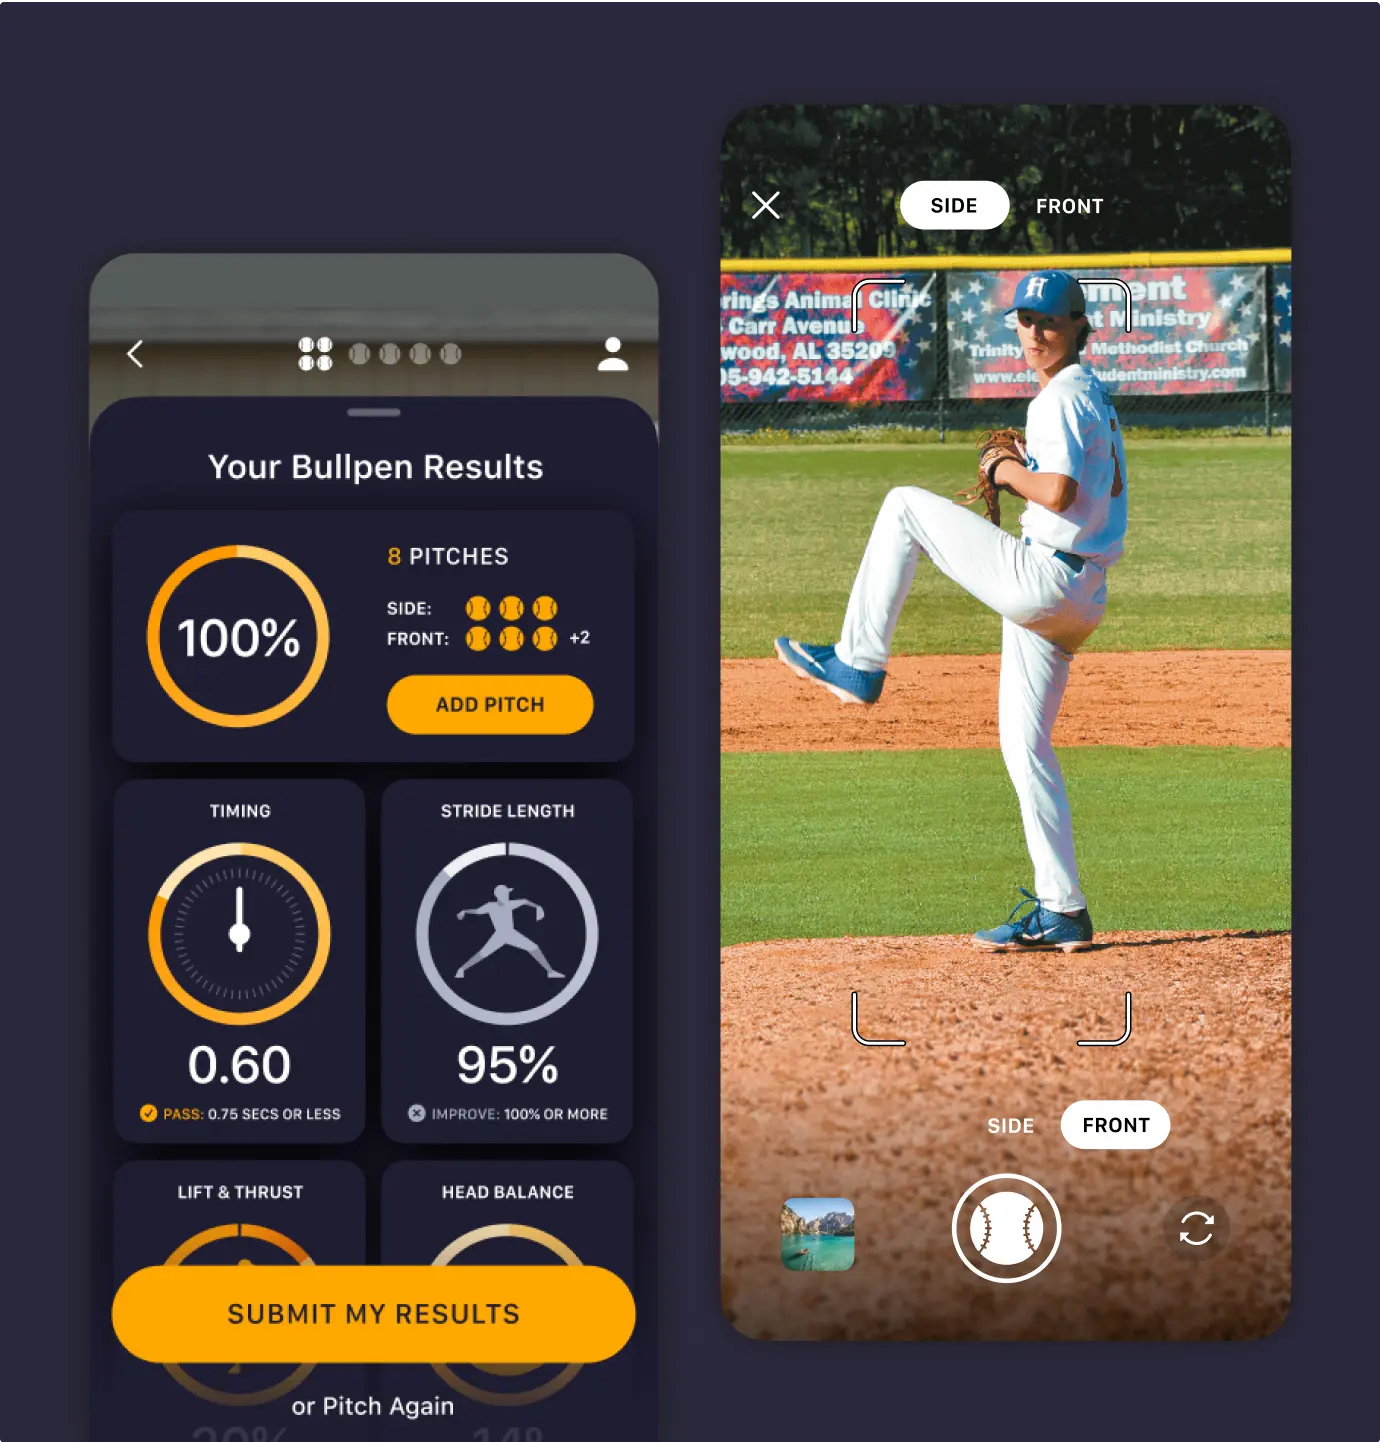 Mustard case study - 2 screens of the app. Showing results and the recording of a baseball pitcher